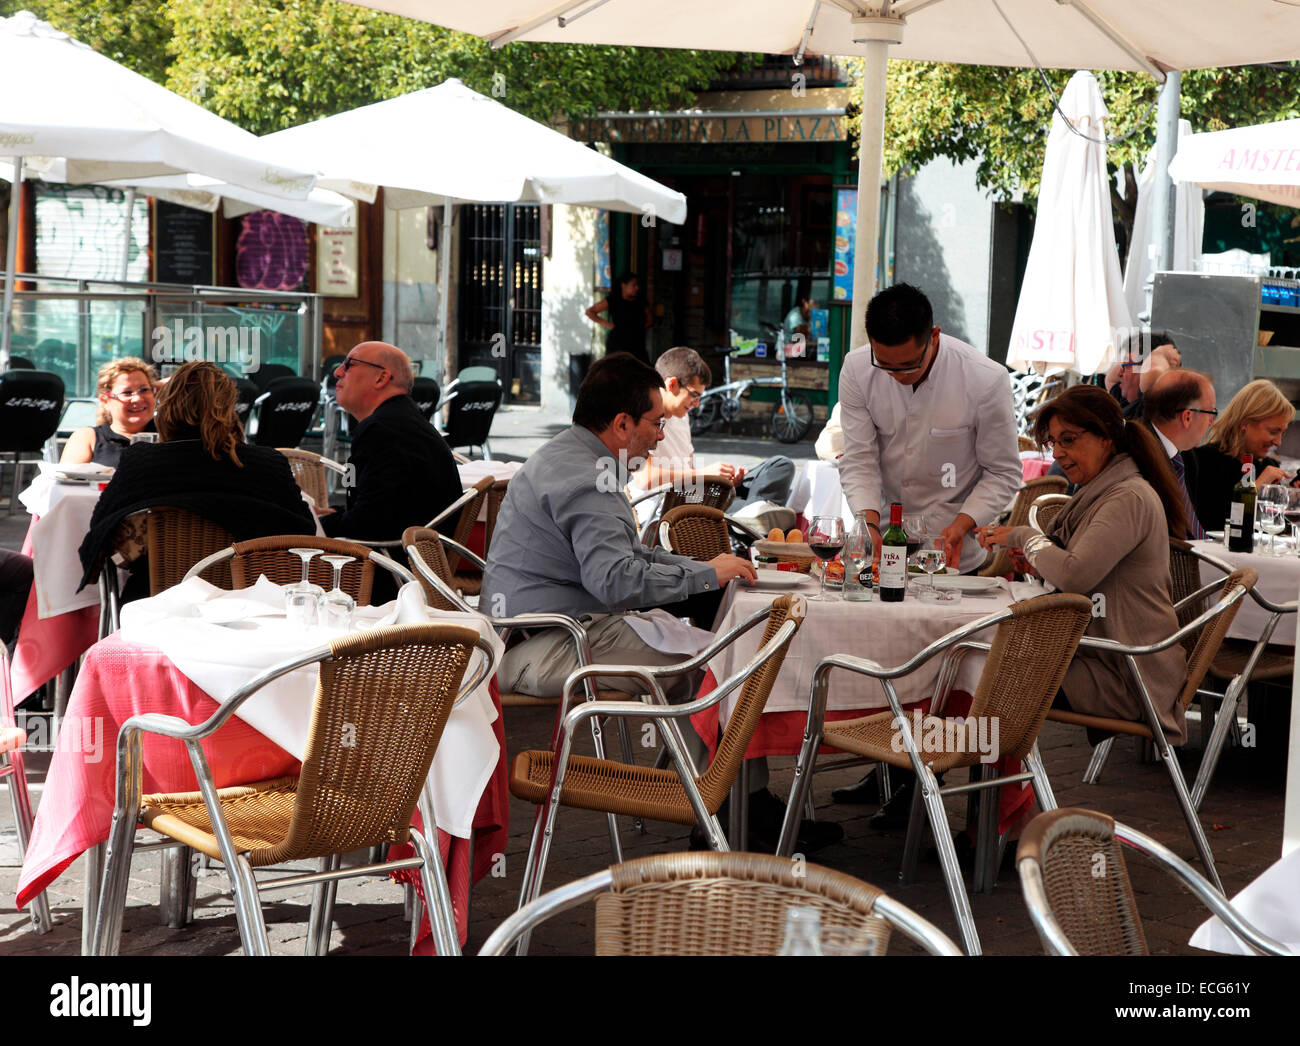 Lunch at a Plaza Sant Ana restaurant in Madrid. Stock Photo